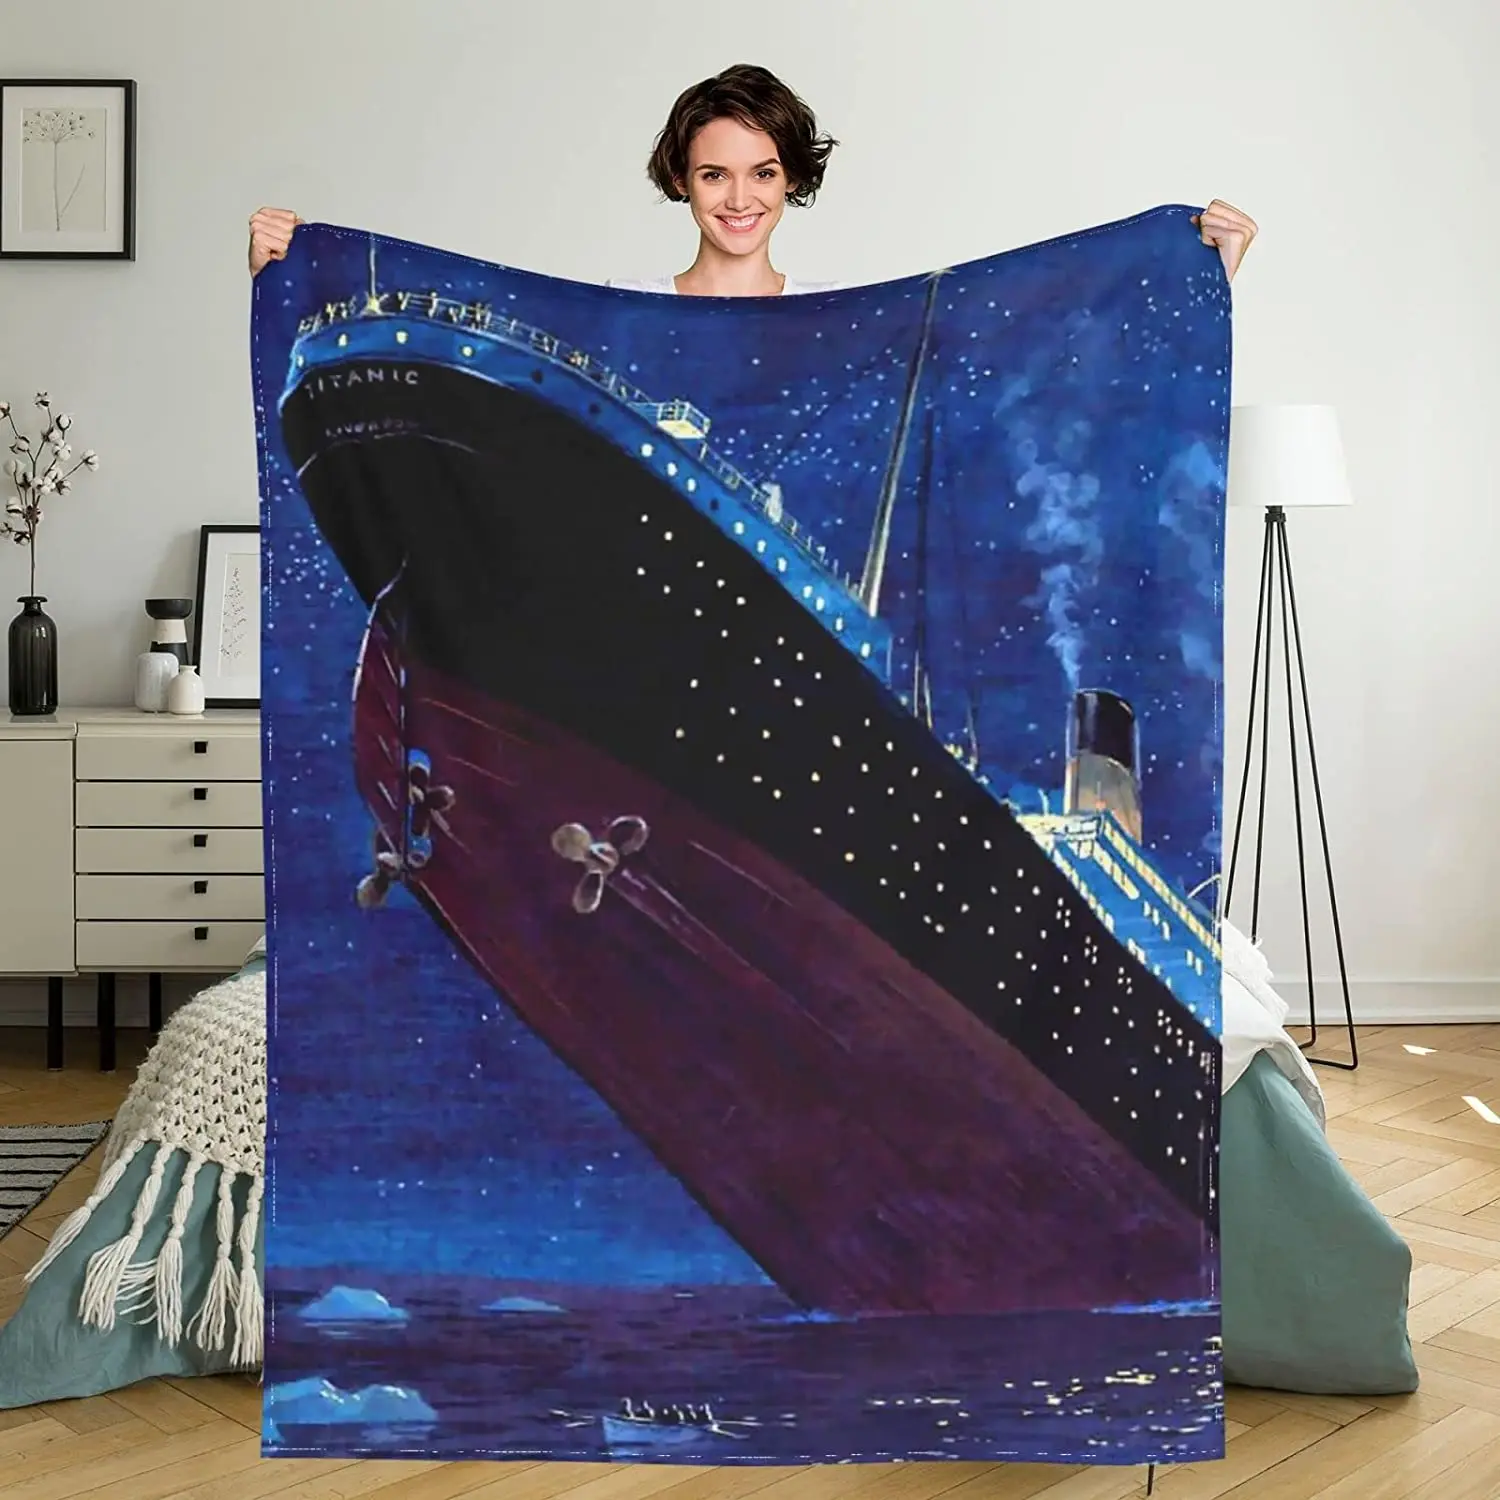 

Titanic Sinking 60x50 inch Throw Blanket Super Soft Fuzzy Cozy Warm Fluffy Plush Blanket for Bed Couch Chair Living Room Fall